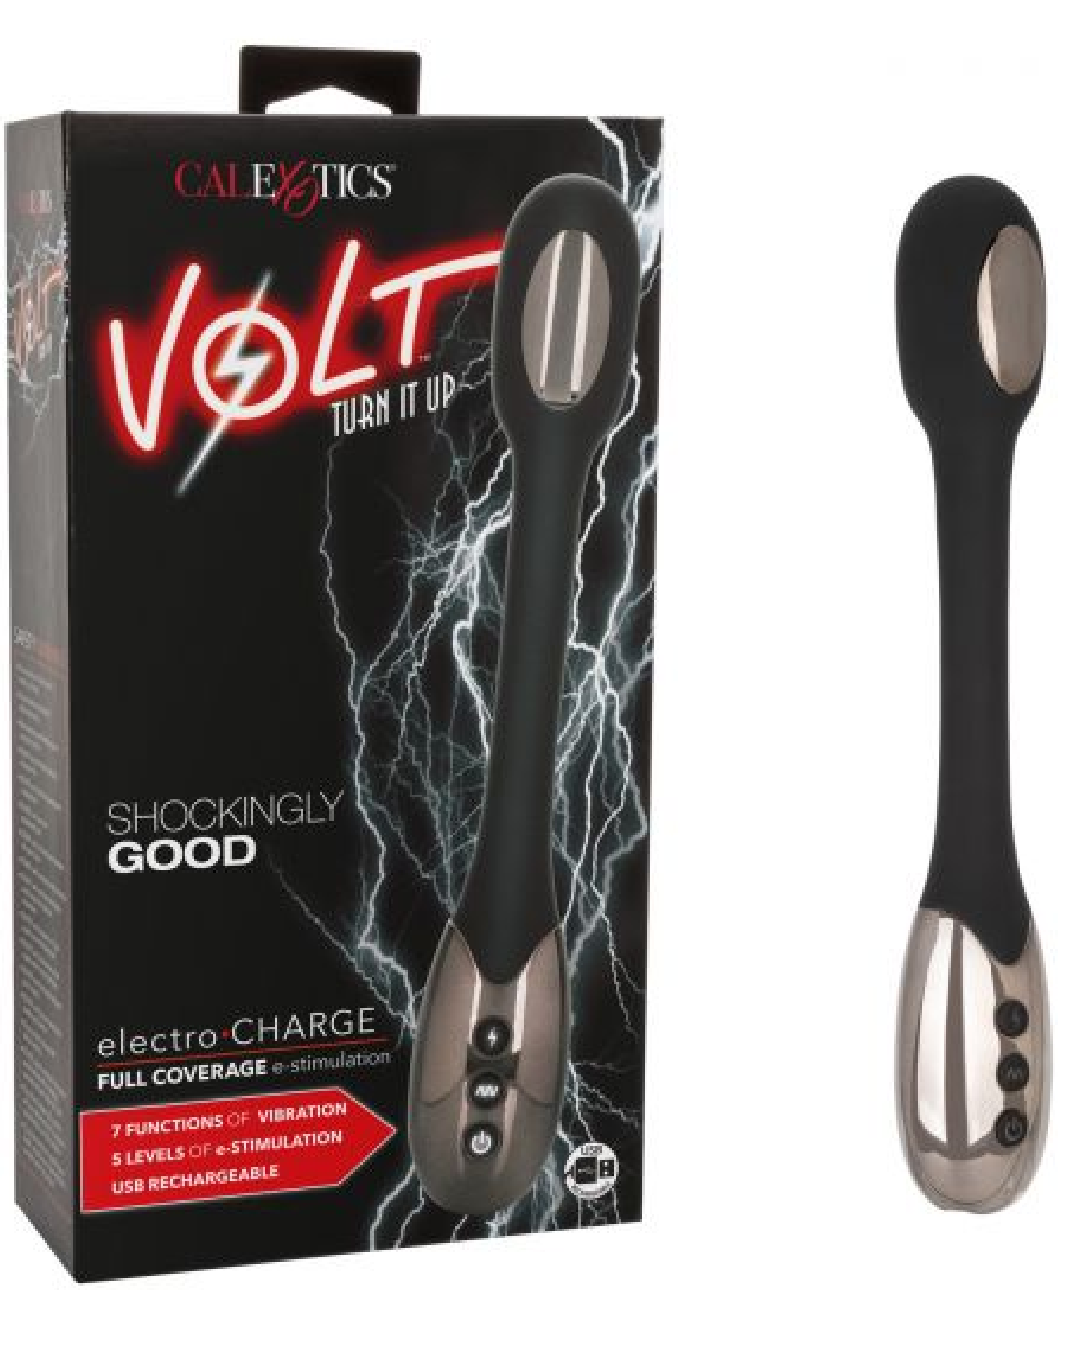 Volt Electro-Charge Electric Stimulator product with box on white background 